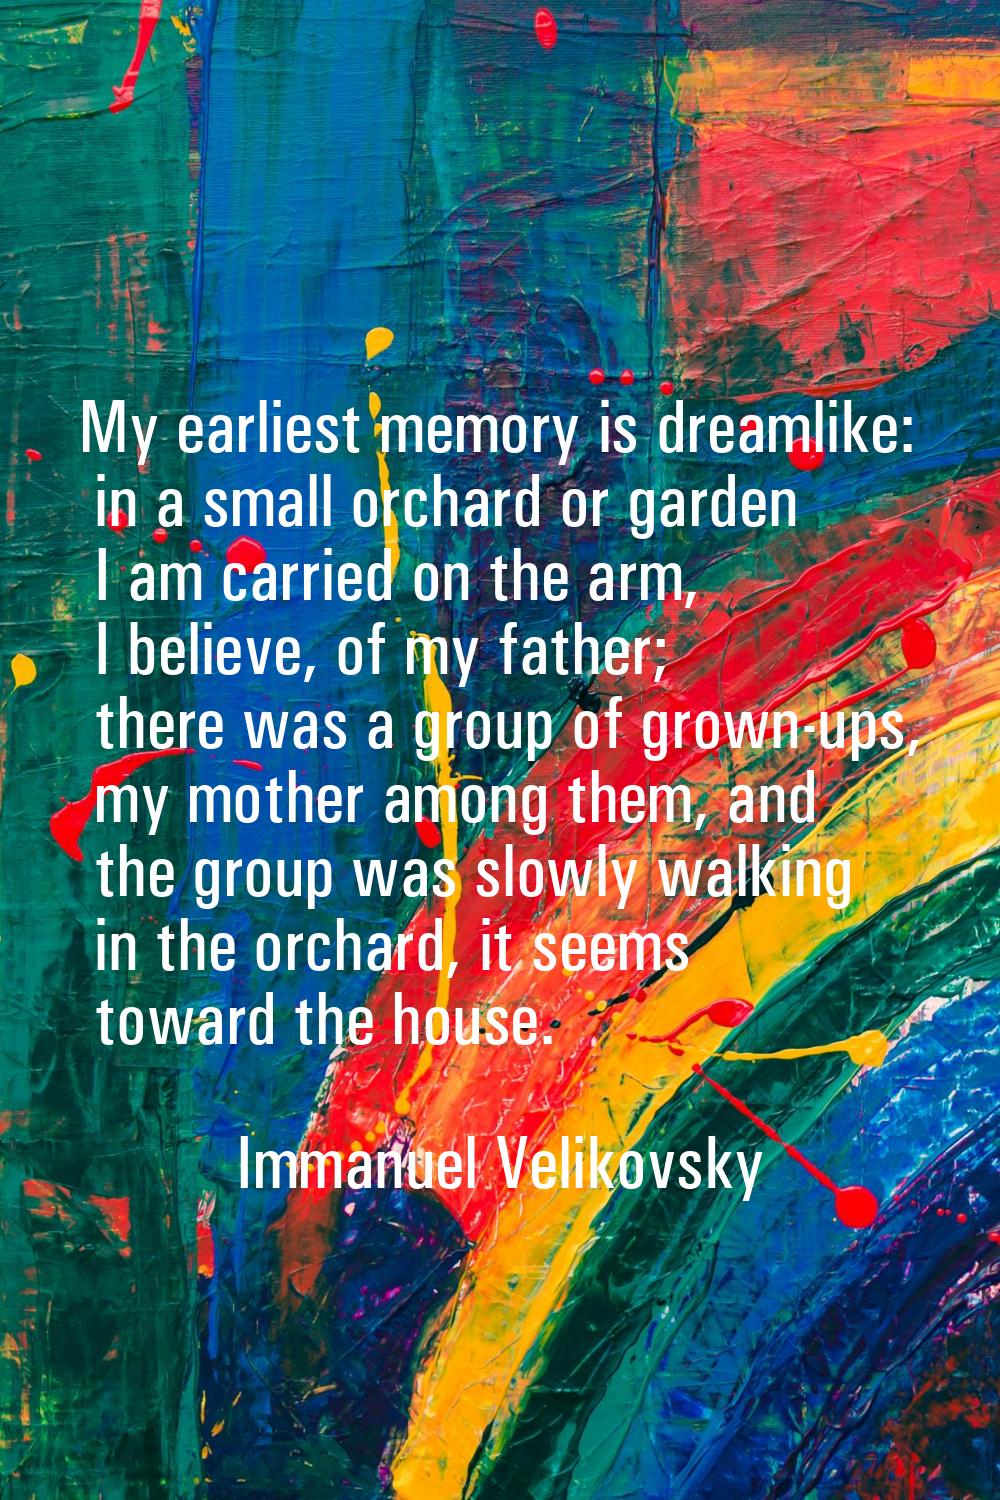 My earliest memory is dreamlike: in a small orchard or garden I am carried on the arm, I believe, o